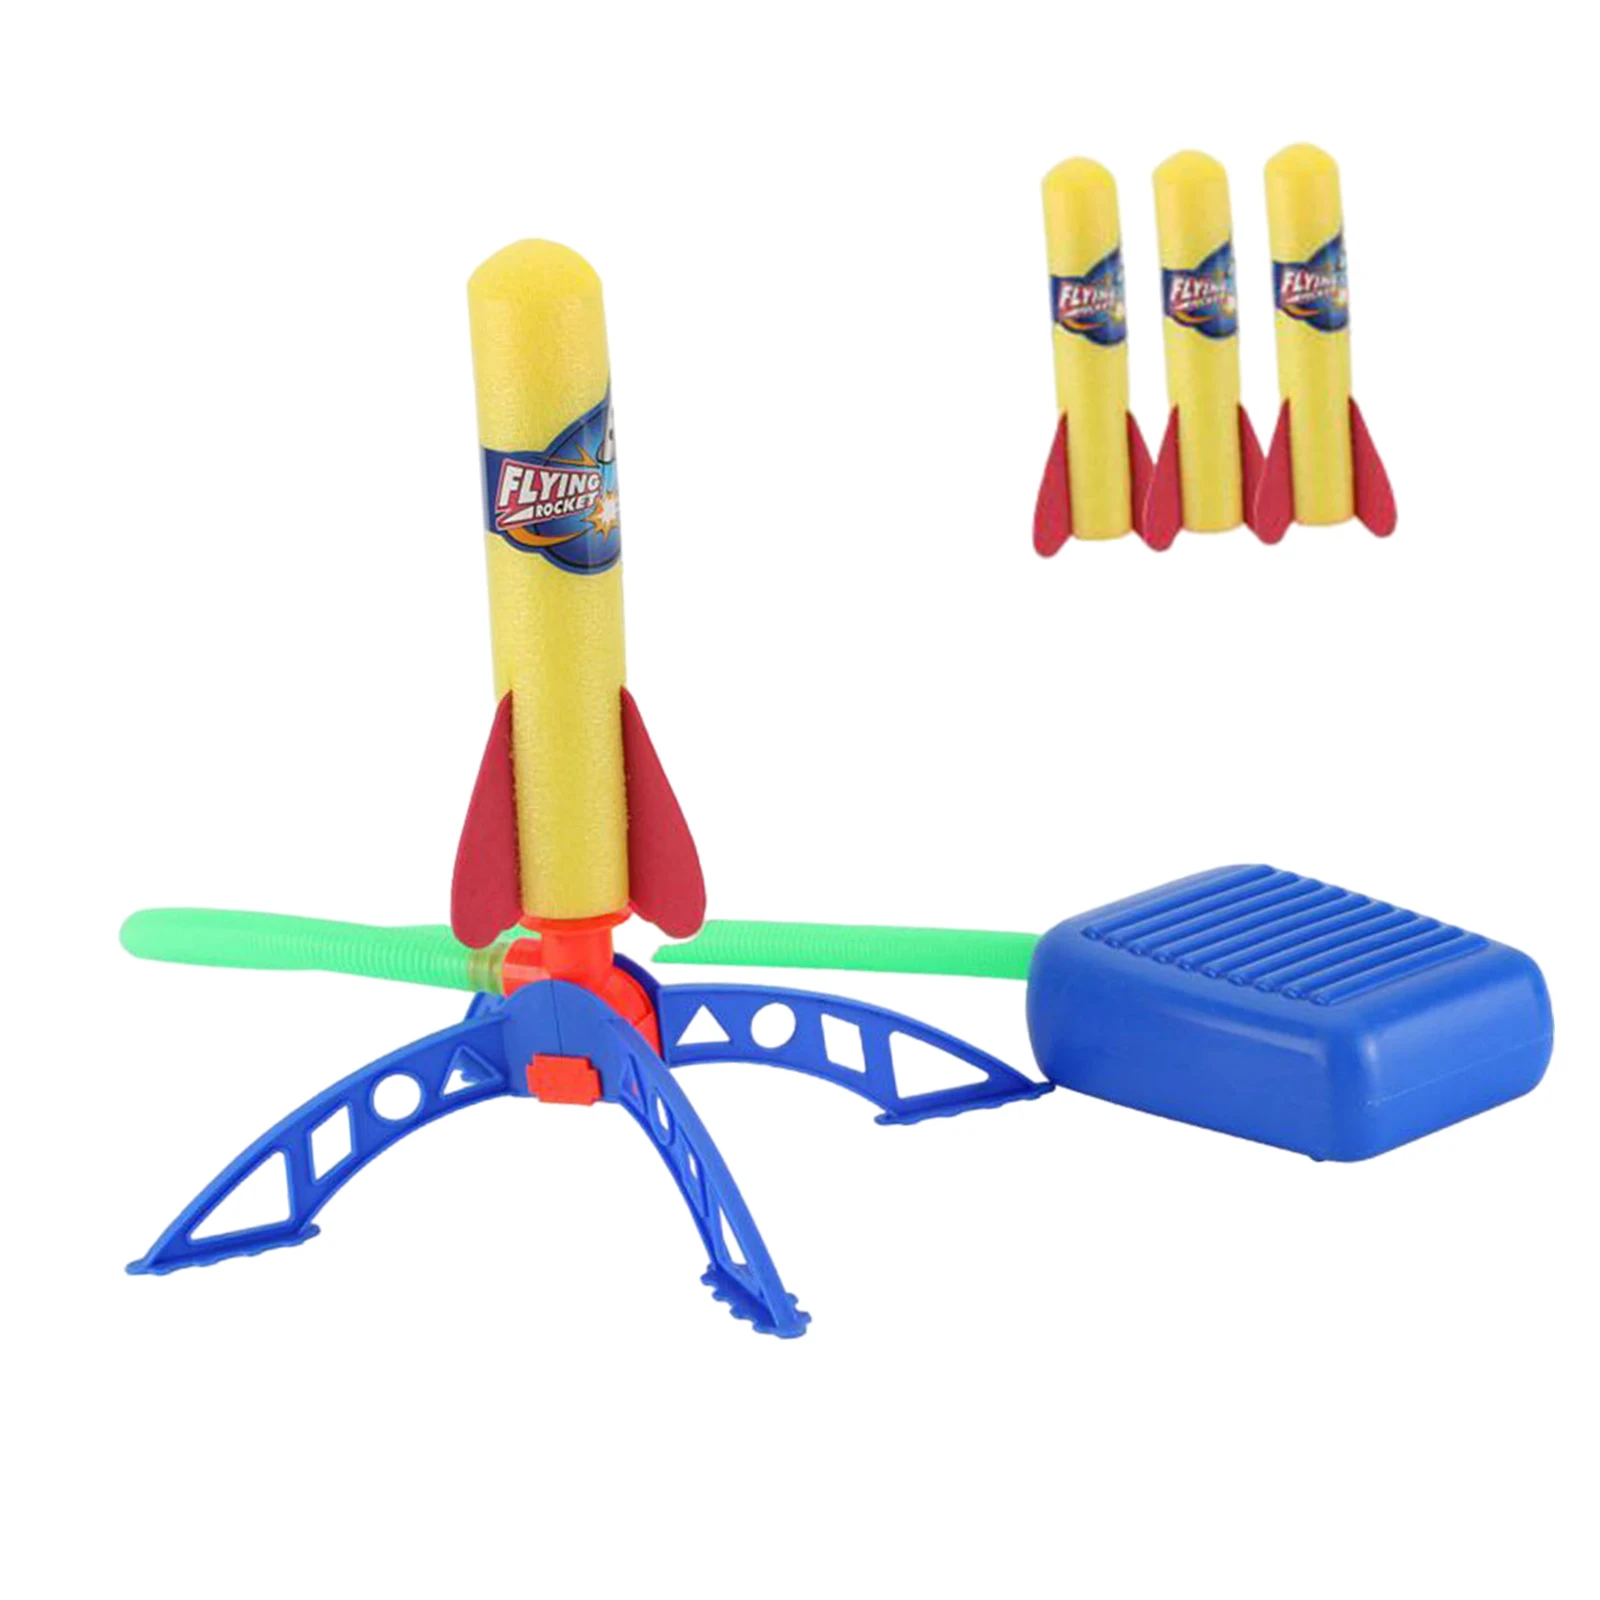 Stomp Foam Rocket Toy Rockets for Kids Outdoor Play Toys Garden Yard Toys for 